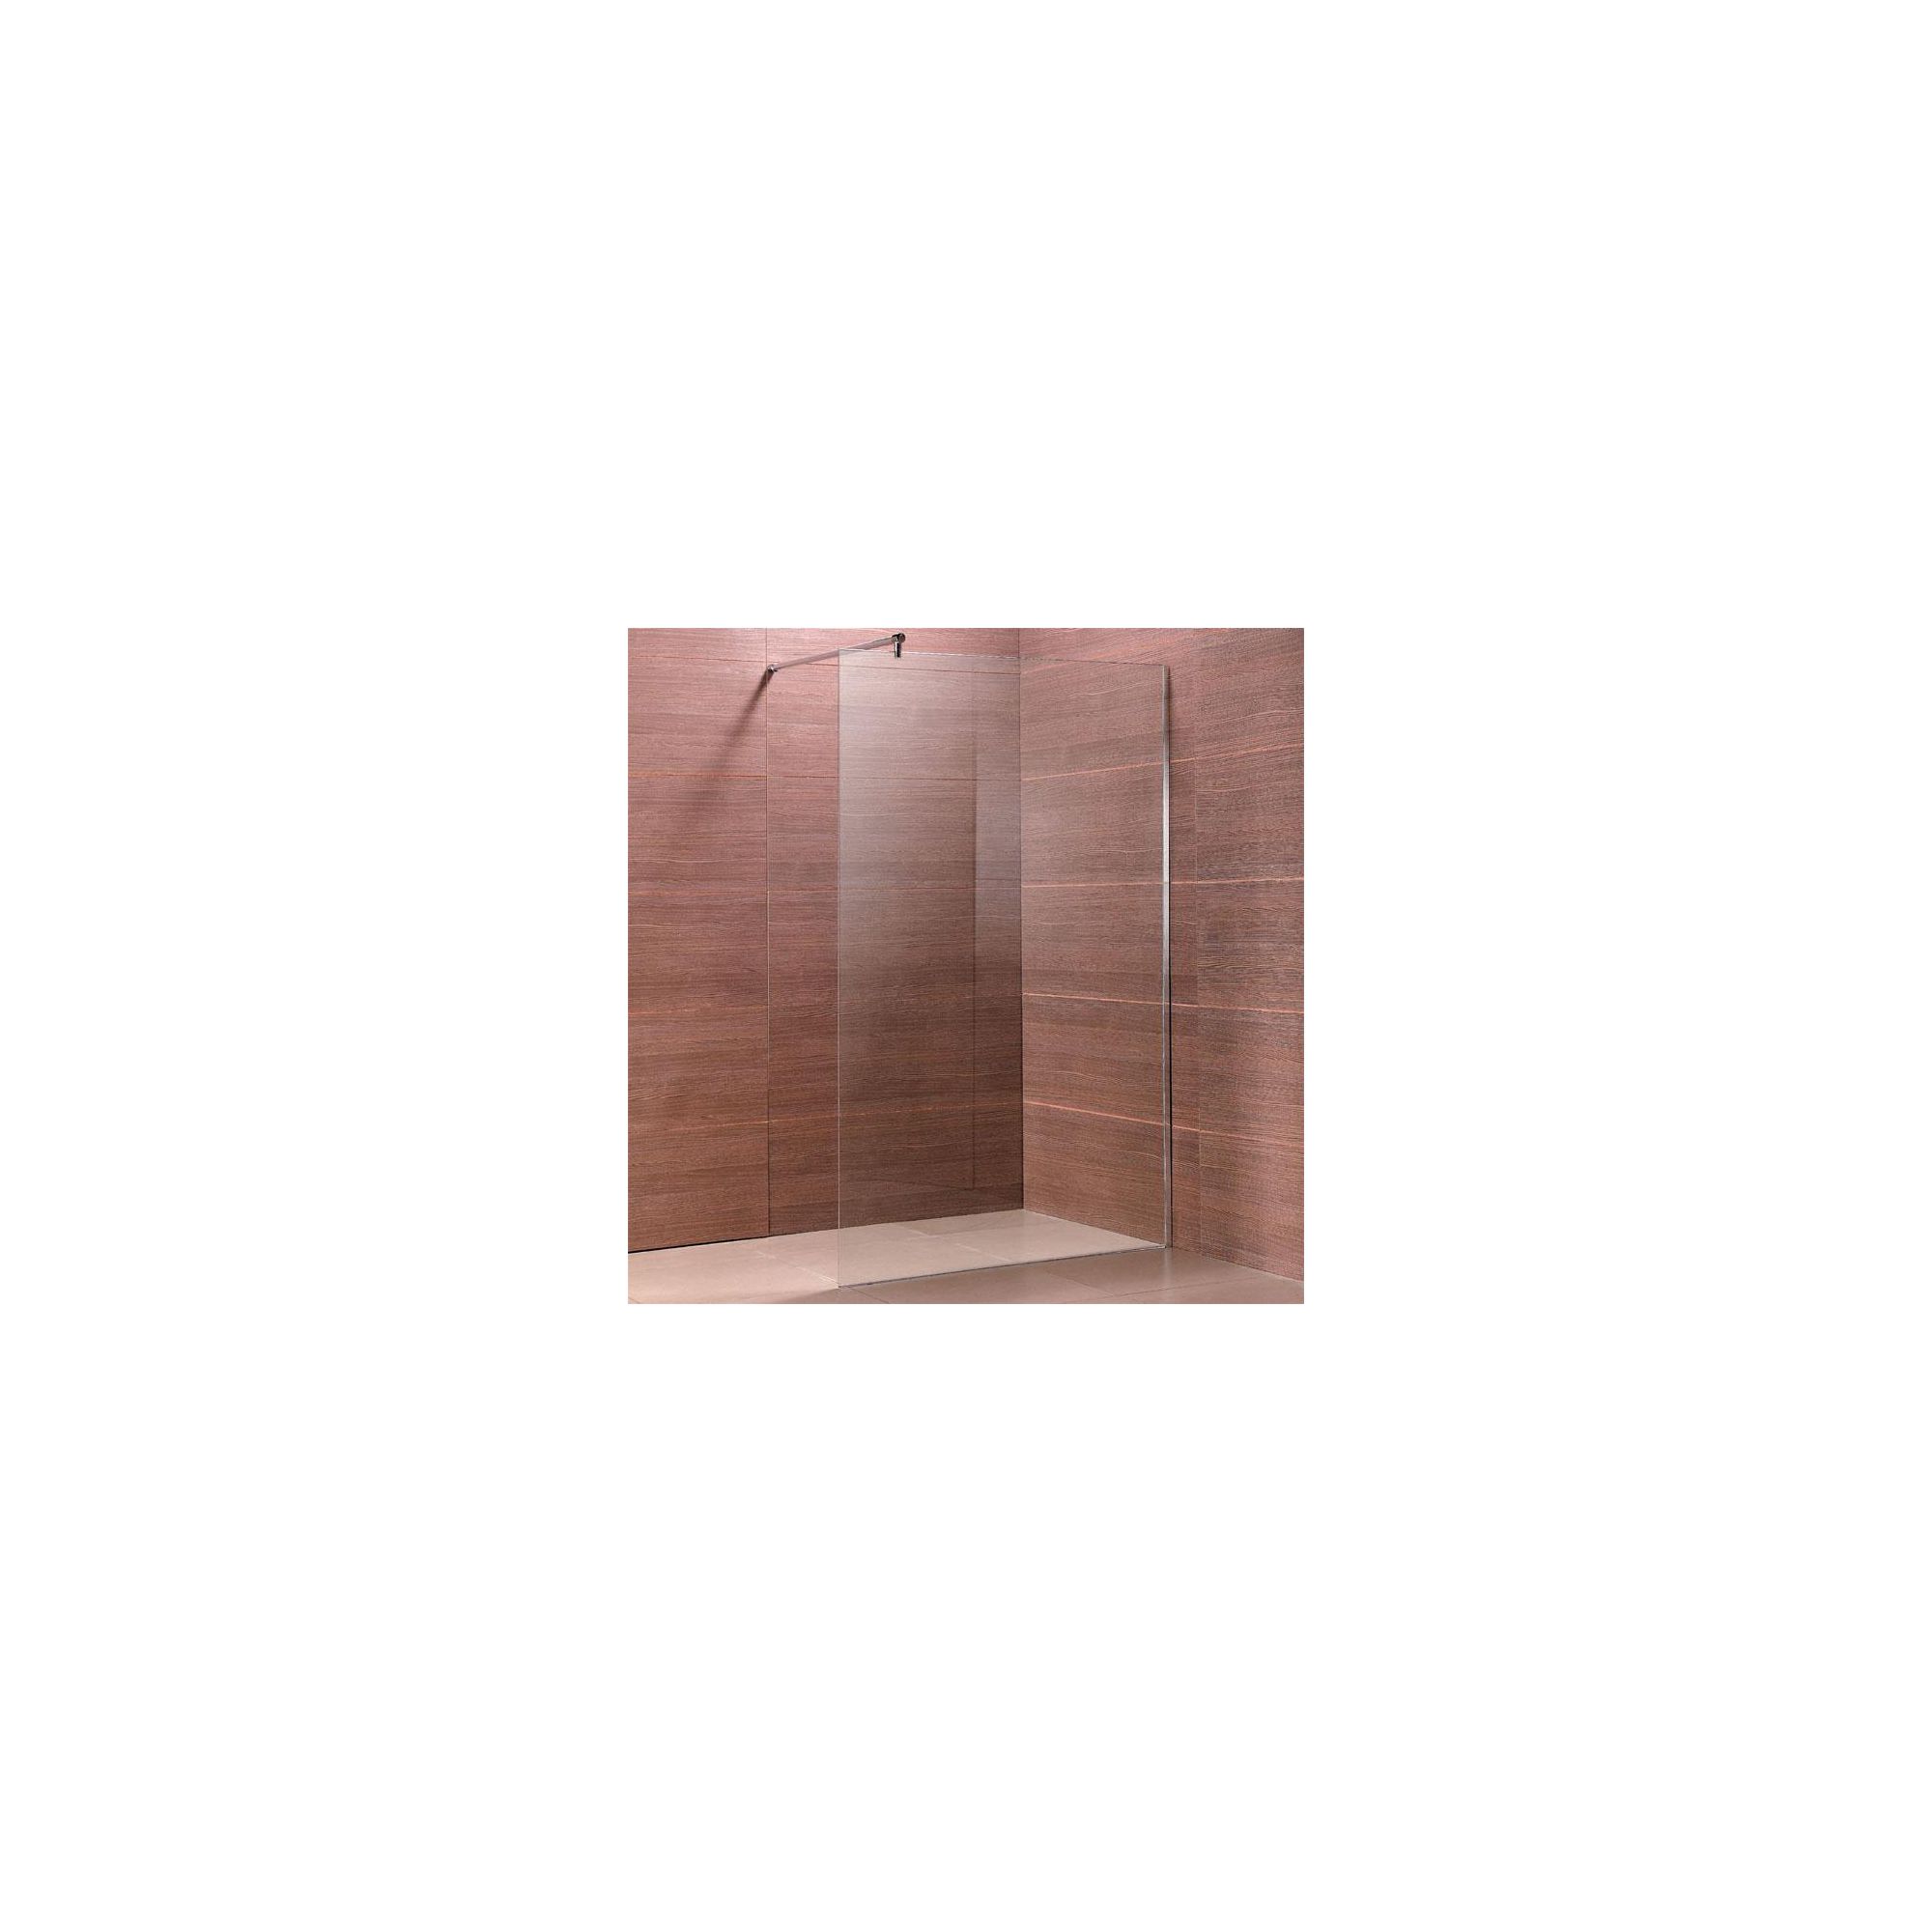 Duchy Premium Wet Room Glass Shower Panel, 1200mm x 700mm, 8mm Glass, Low Profile Tray at Tesco Direct